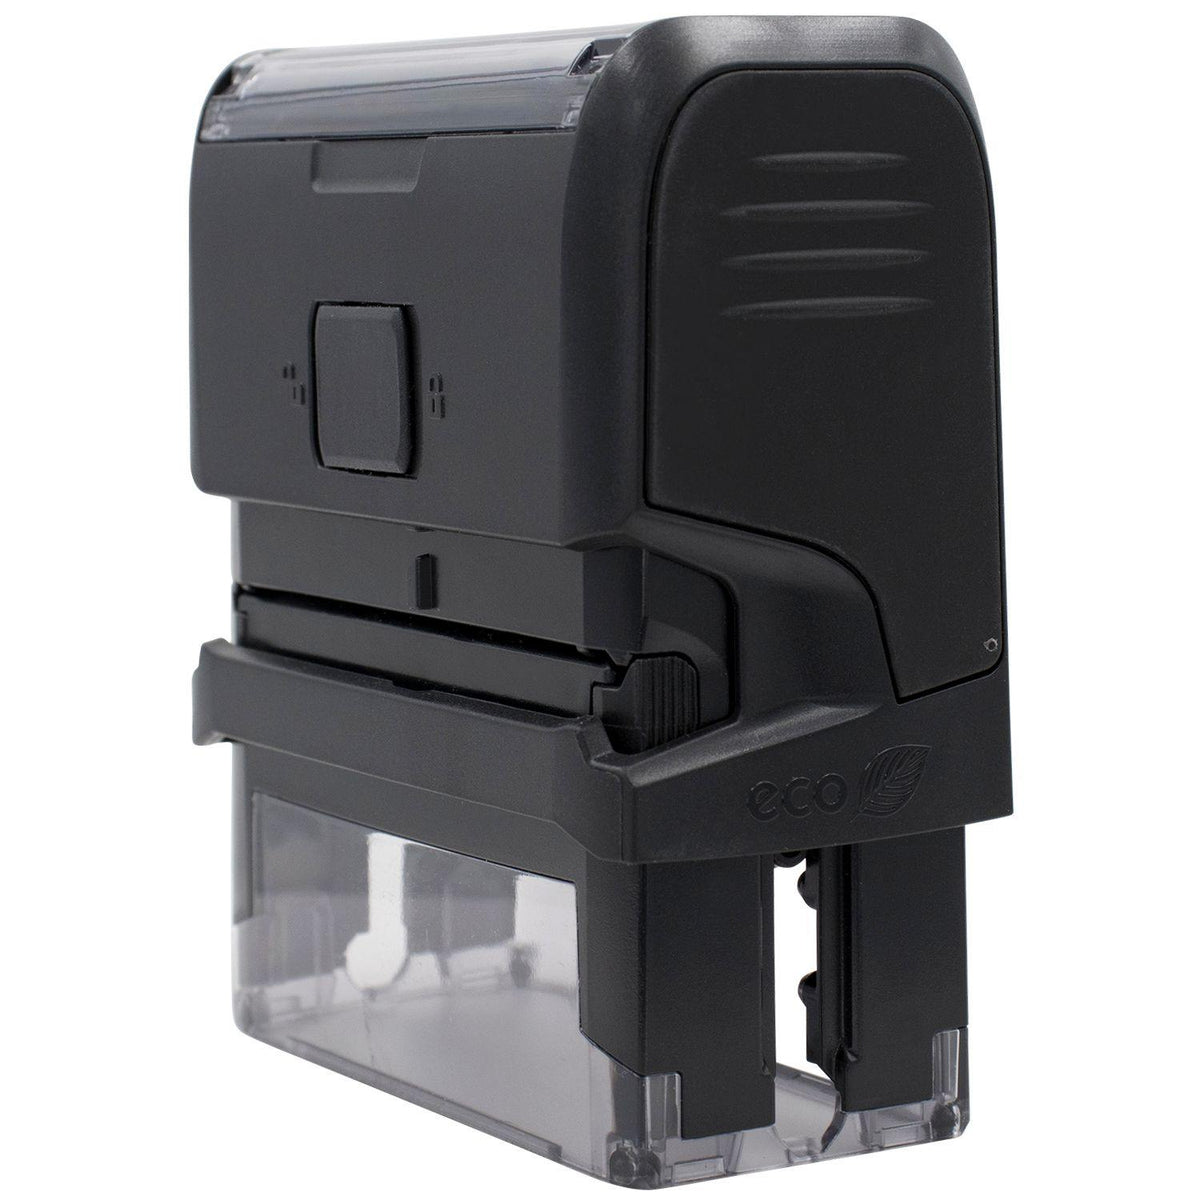 Self Inking Cash Only Stamp - Engineer Seal Stamps - Brand_Trodat, Impression Size_Small, Stamp Type_Self-Inking Stamp, Type of Use_Business, Type of Use_Finance